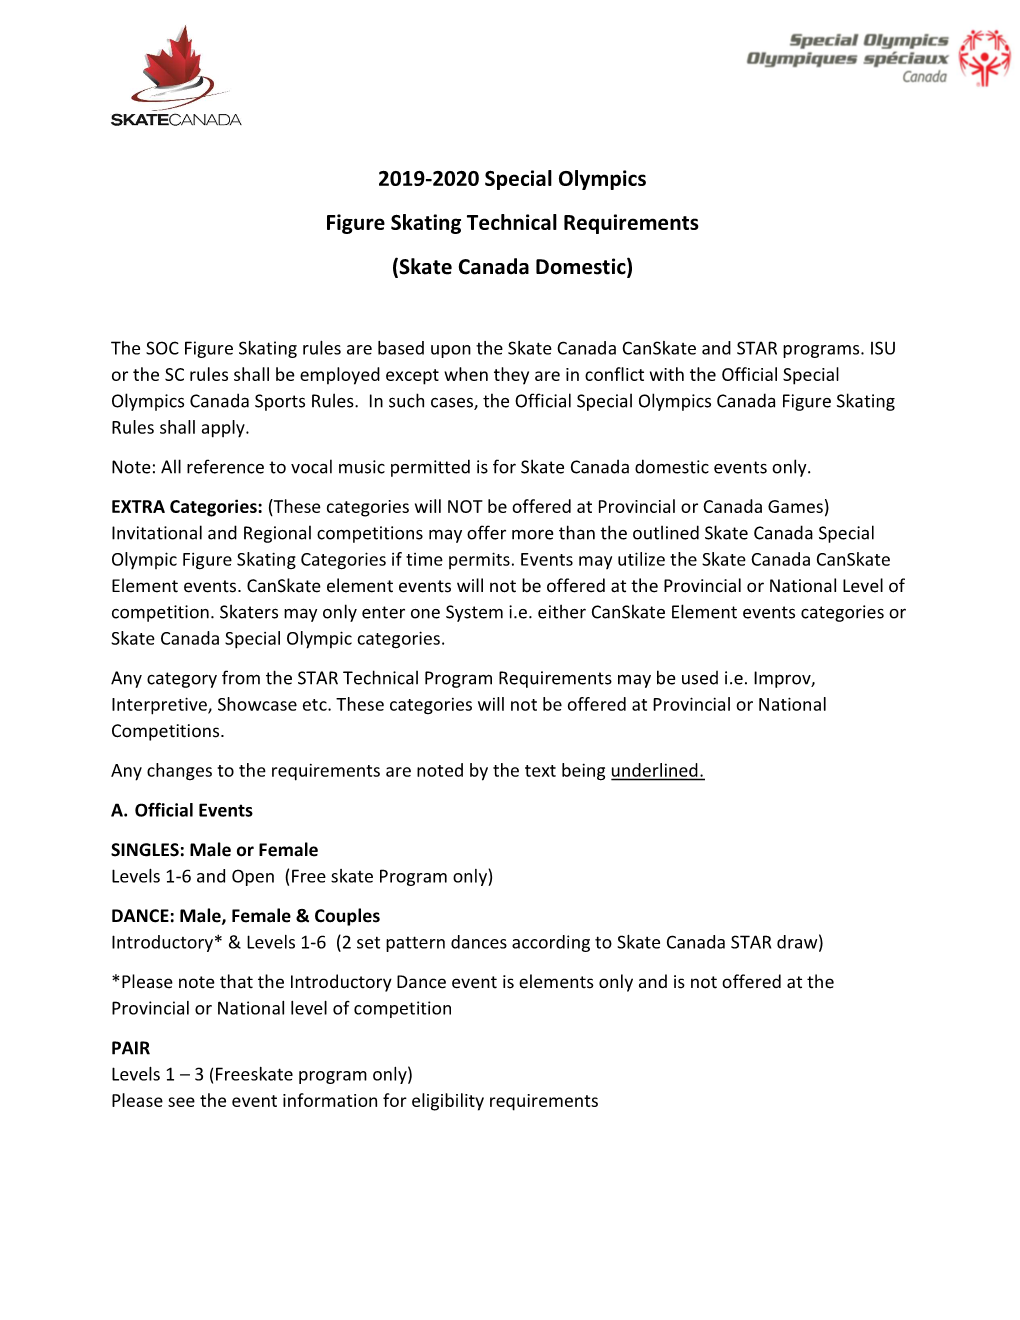 2019-2020 Special Olympics Figure Skating Technical Requirements